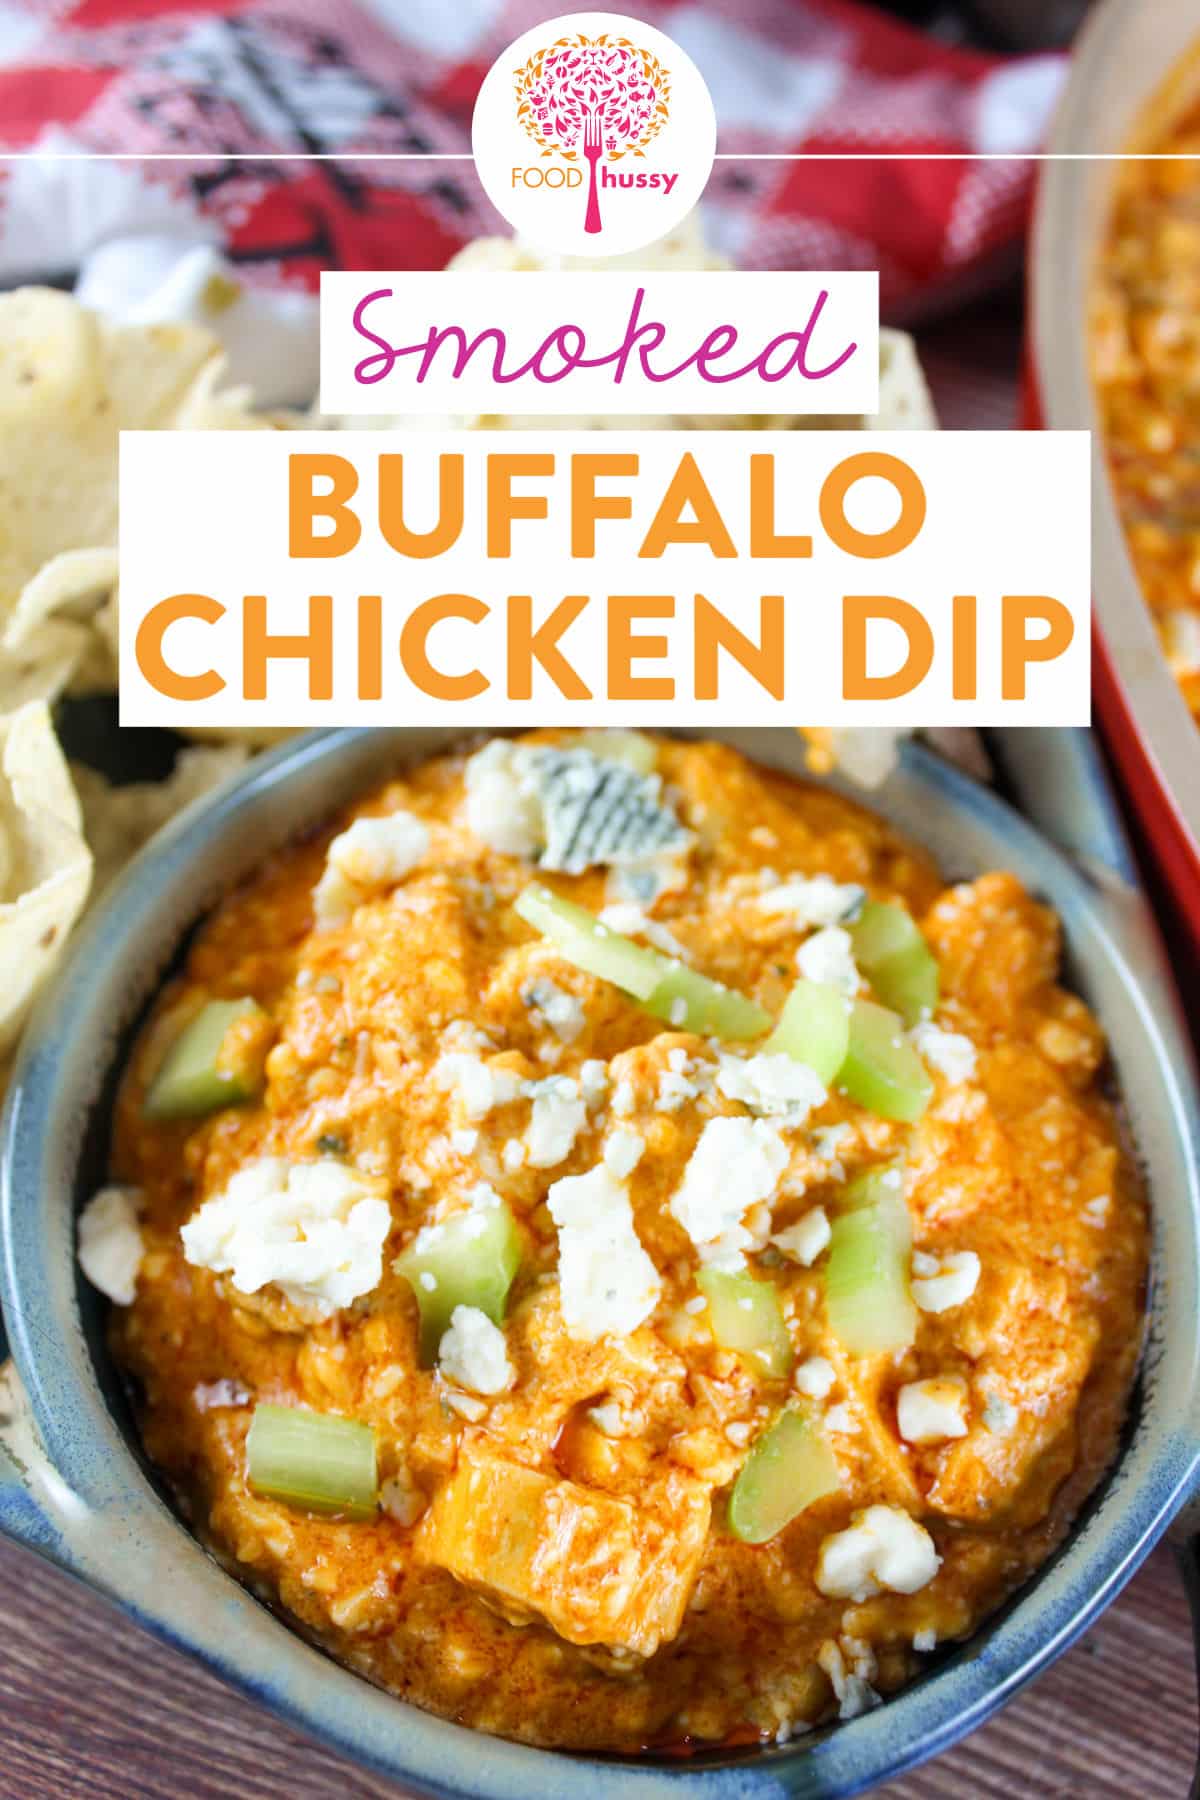 This Smoked Buffalo Chicken Dip is everything you love - cheesy, spicy, zingy, crunchy and just plain delicious! This spicy chicken dip is the favorite for every party!  via @foodhussy